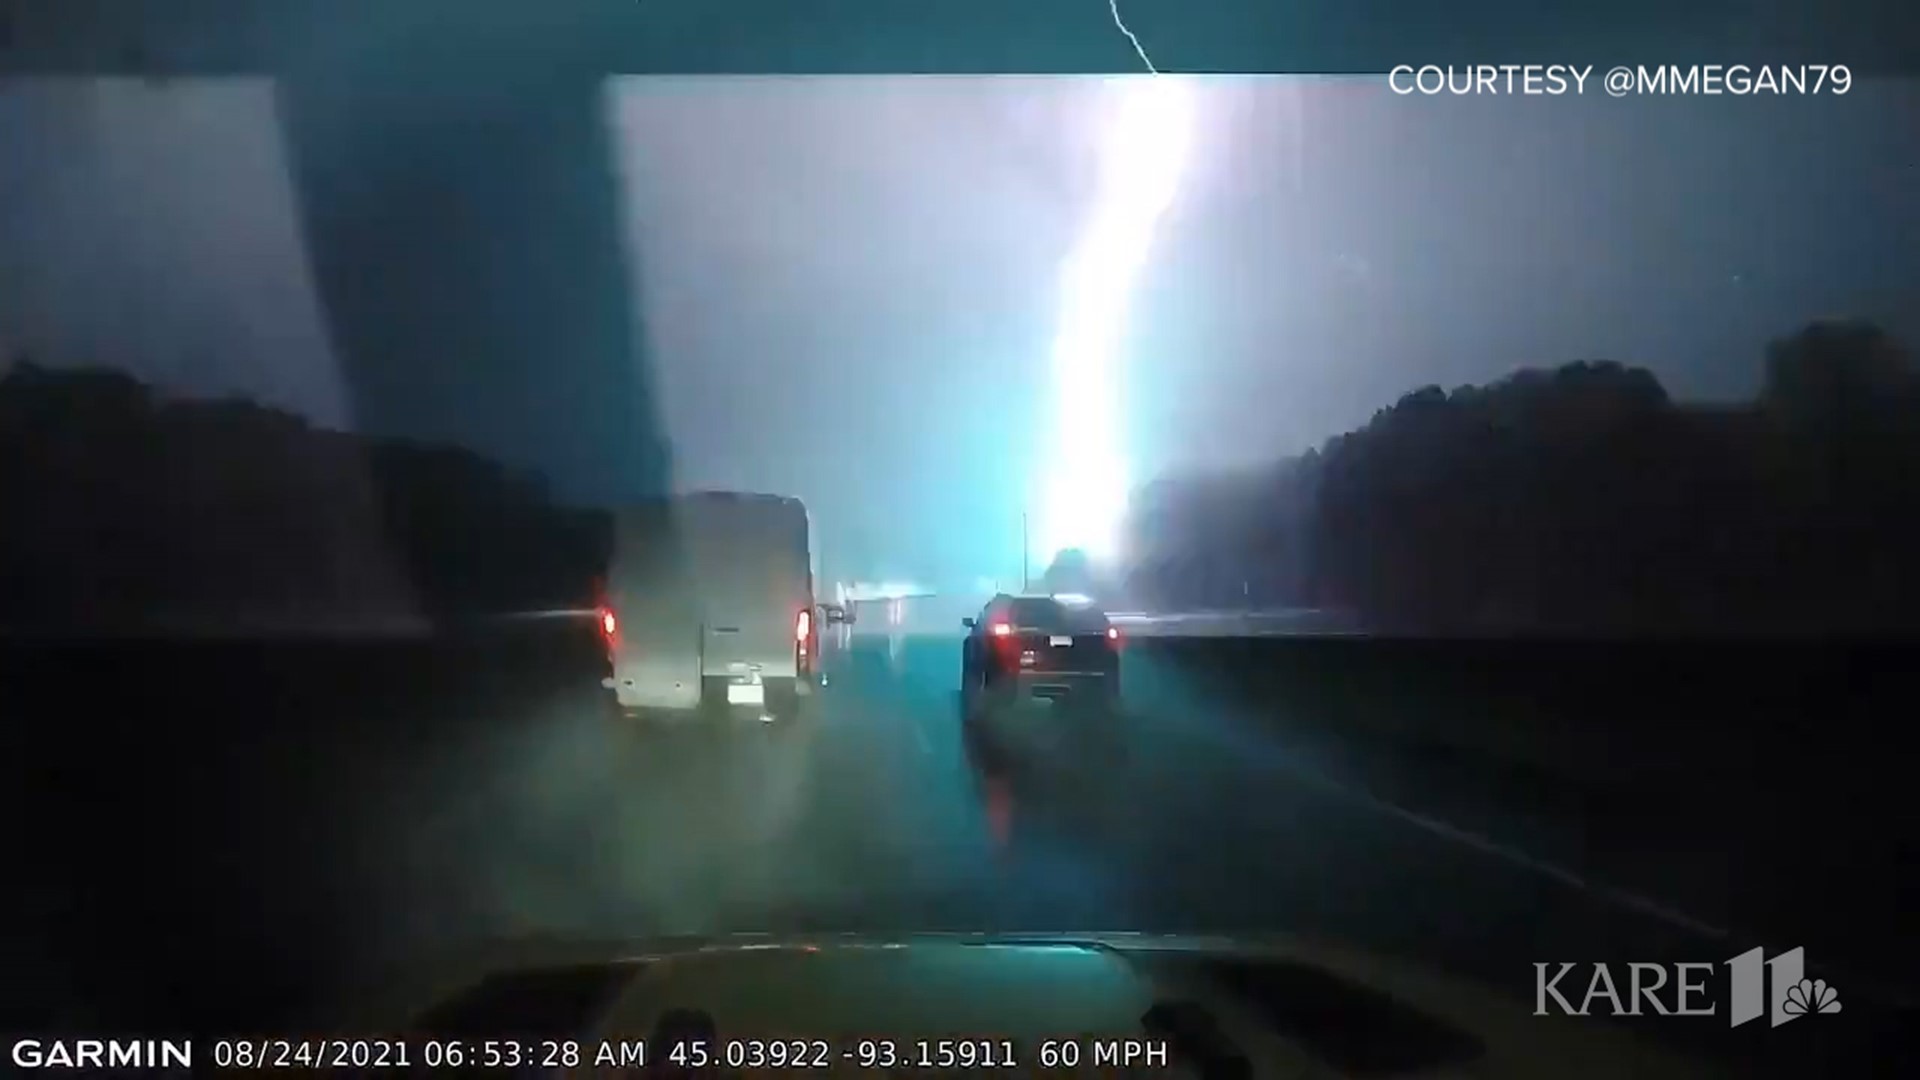 Twitter user @MMegan79 captured a massive lightning strike on dashcam video as severe storms pushed through Minnesota Tuesday morning.